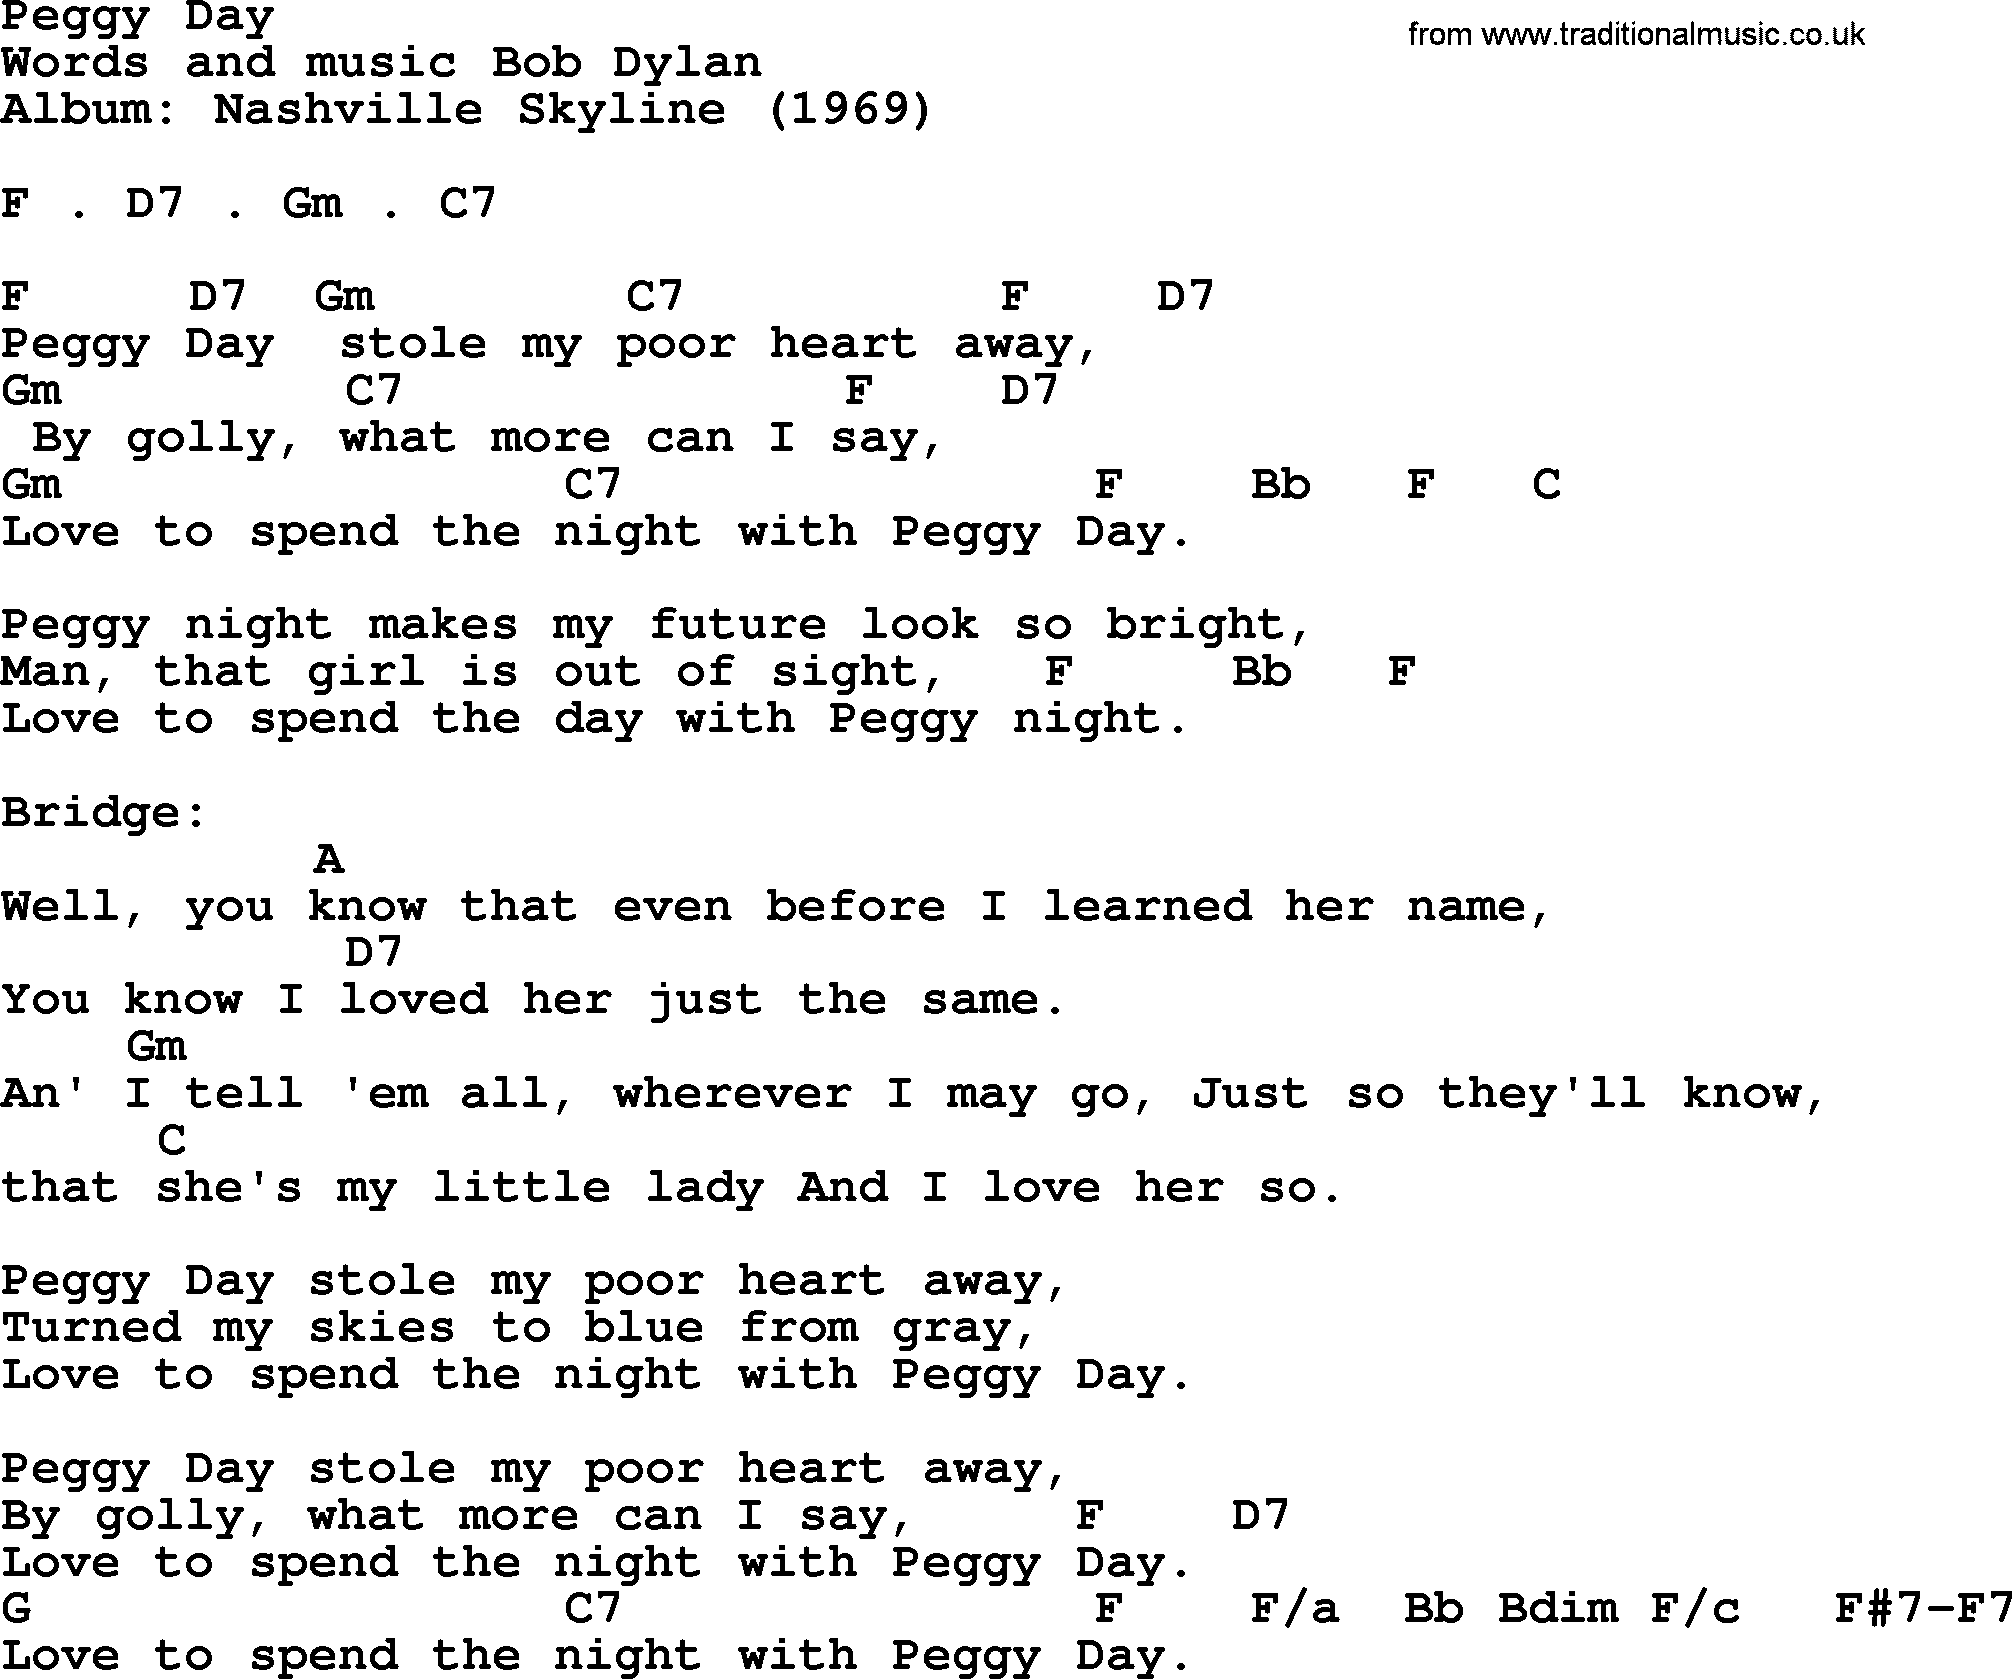 Bob Dylan song, lyrics with chords - Peggy Day